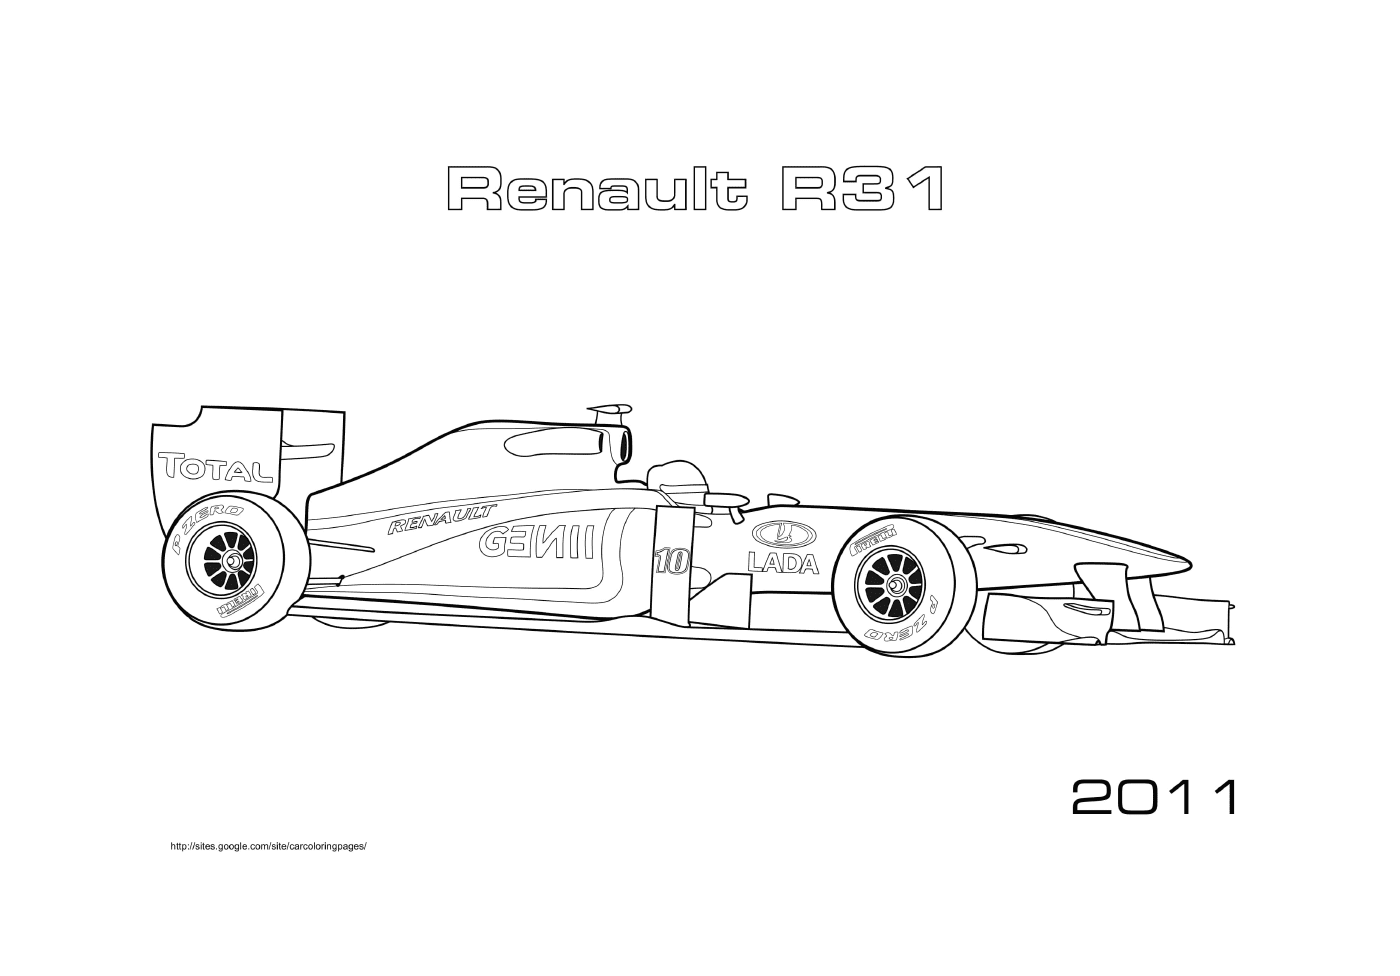  Renault R31 of 2011 